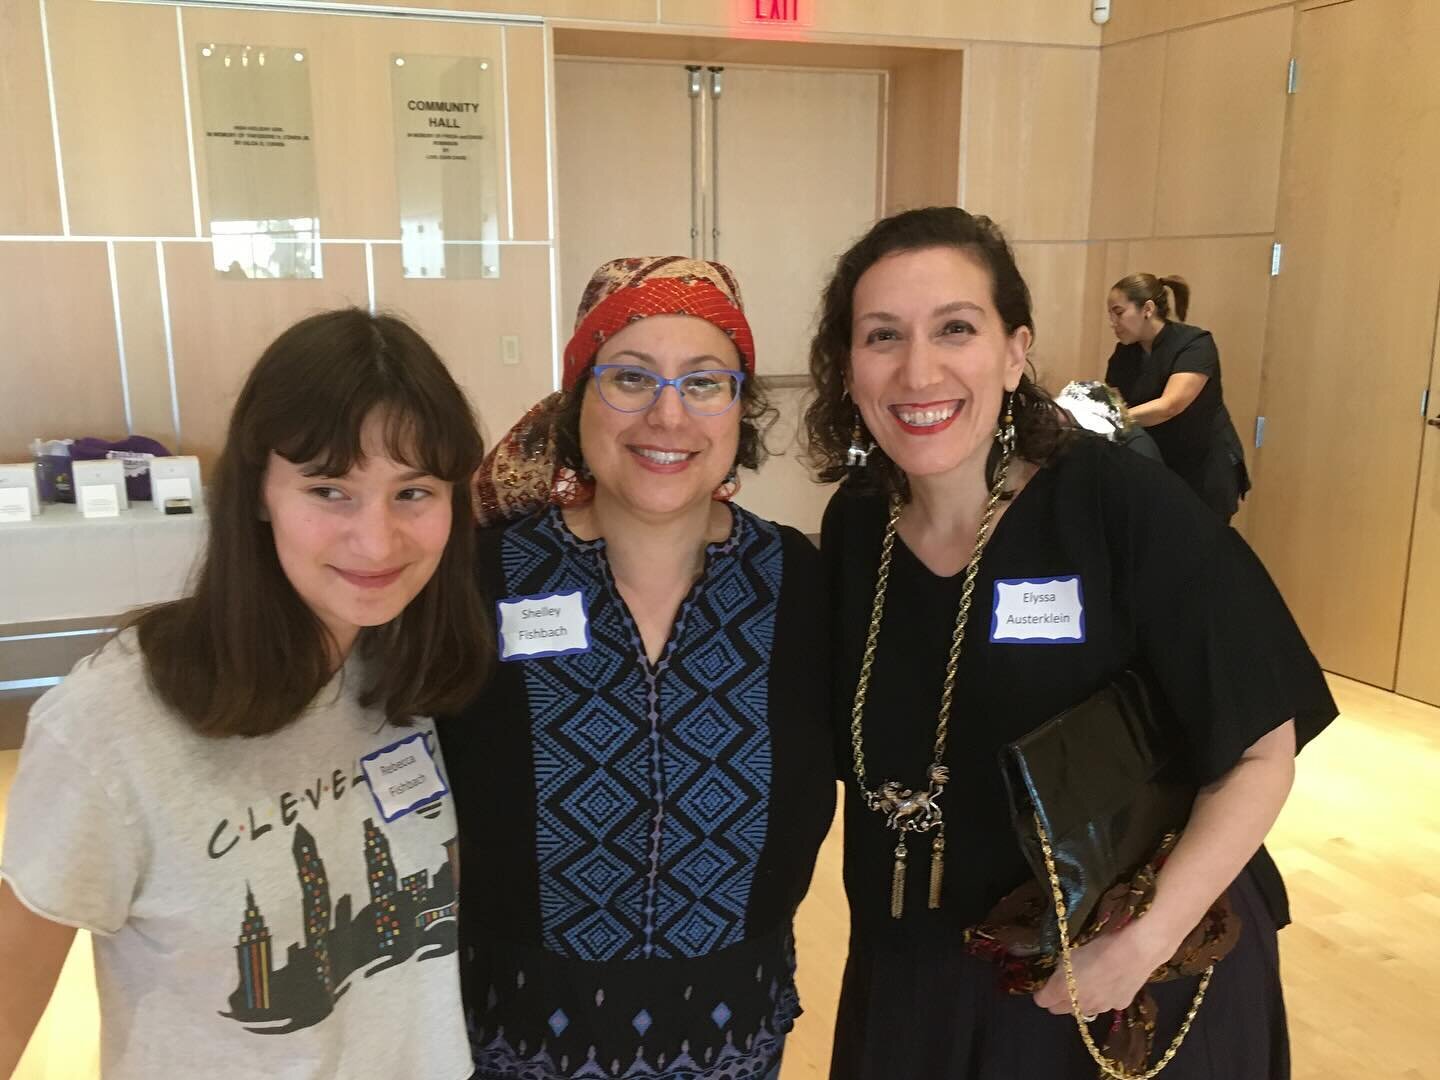 Last night, Park Synagogue&rsquo;s 𝑵𝒆𝒔𝒉𝒂𝒎𝒂 and 𝑹𝒐𝒔𝒉 𝑪𝒉𝒐𝒅𝒆𝒔𝒉 Groups hosted 𝐕𝐀𝐒𝐇𝐓𝐈'𝐒 𝐁𝐀𝐍𝐐𝐔𝐄𝐓. Ladies of all generations enjoyed good food, fortune telling, chair massages, bracelet making, henna designs and dancing. Than